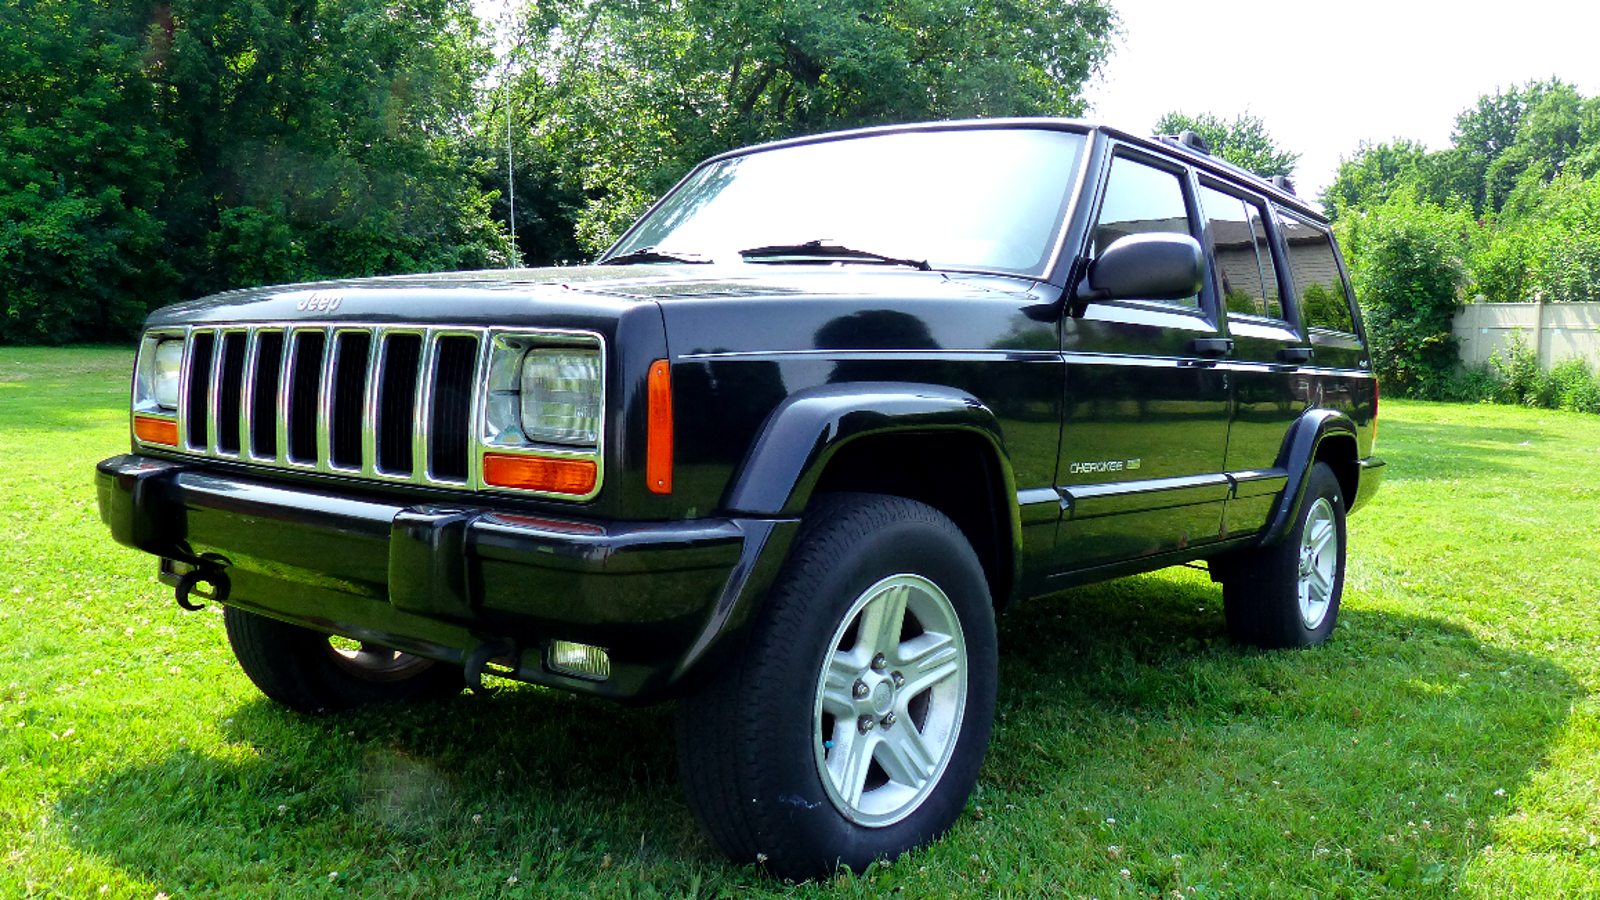 I Just Bought a LowMileage Jeep Cherokee for 500 and It